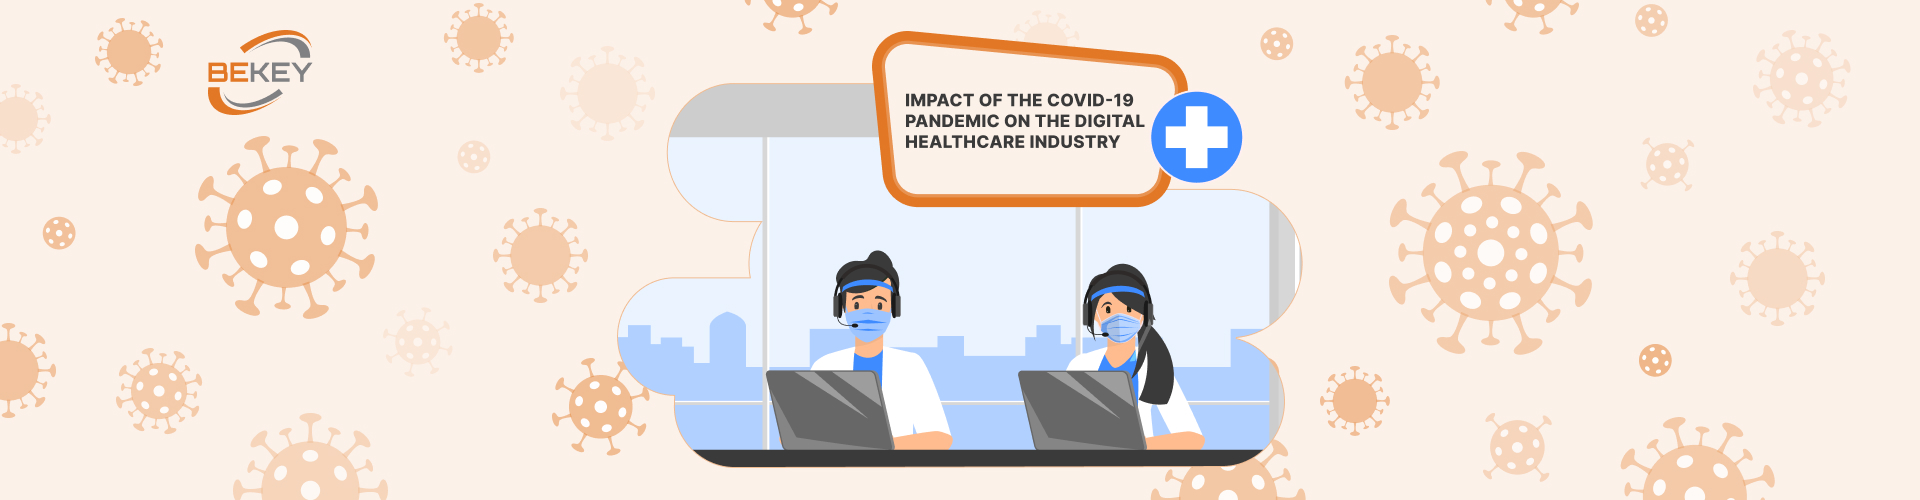 Impact of the COVID-19 pandemic on the digital healthcare 